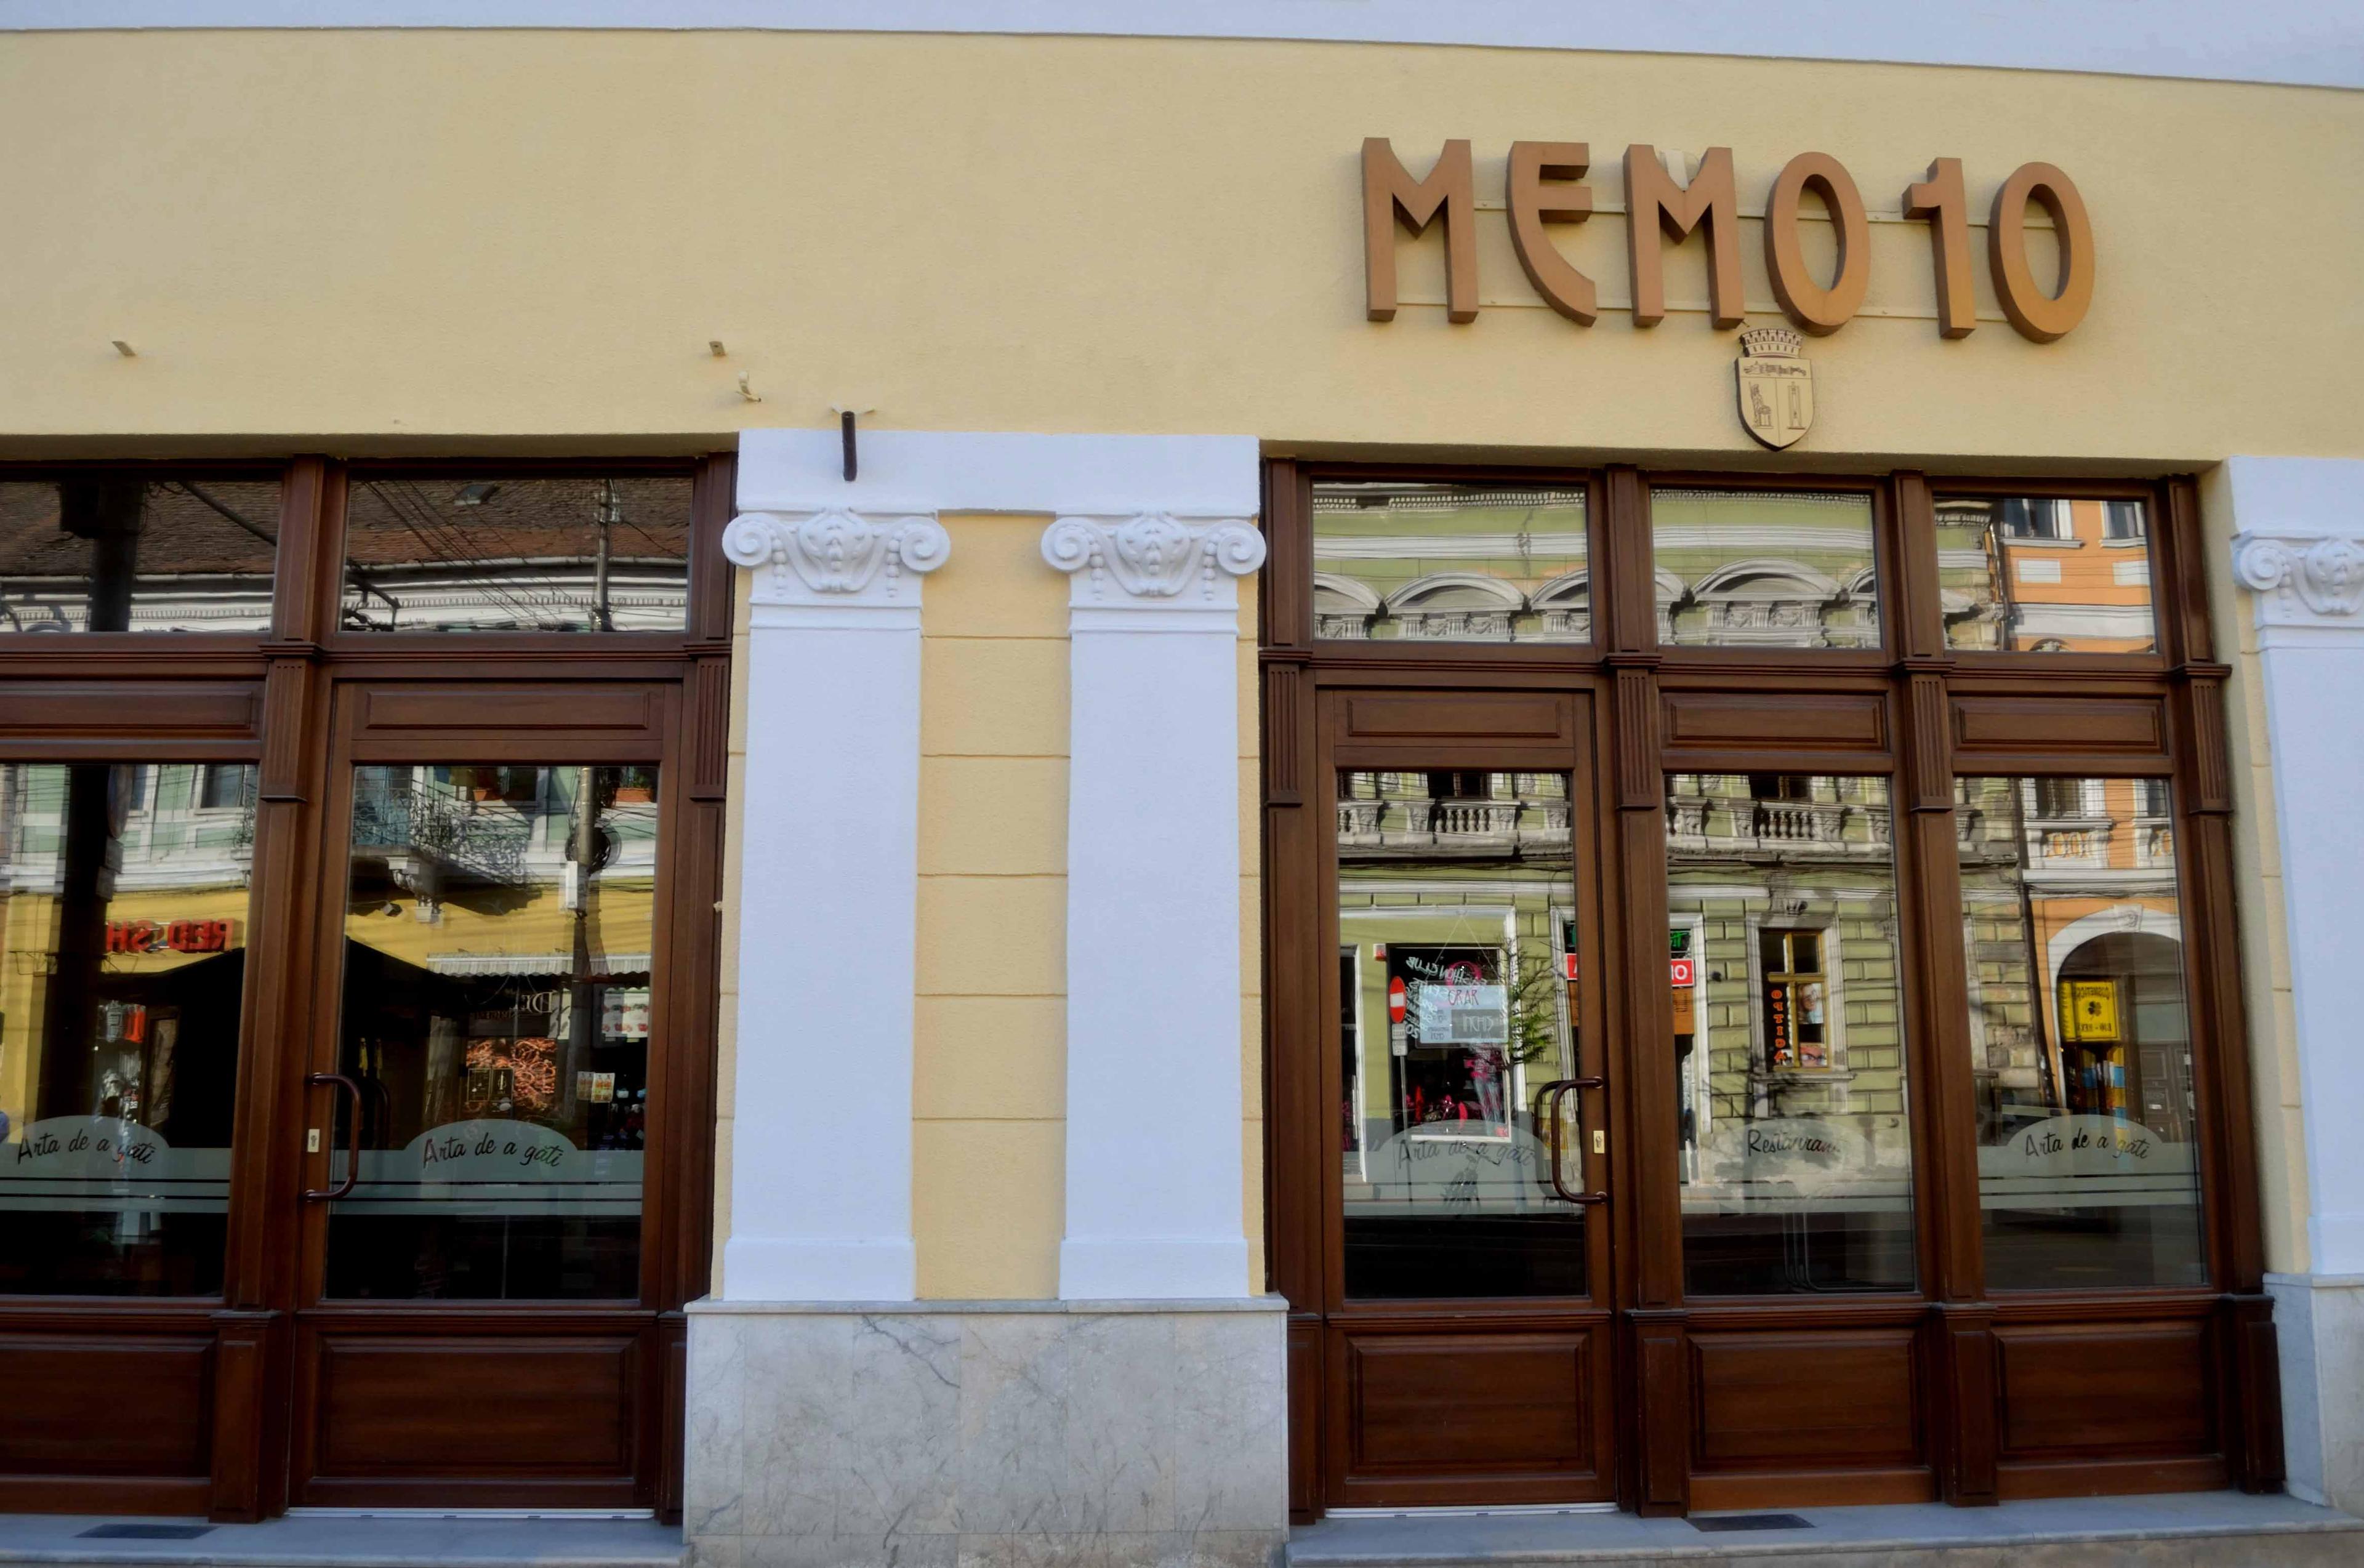 Cover image of this place Memo 10